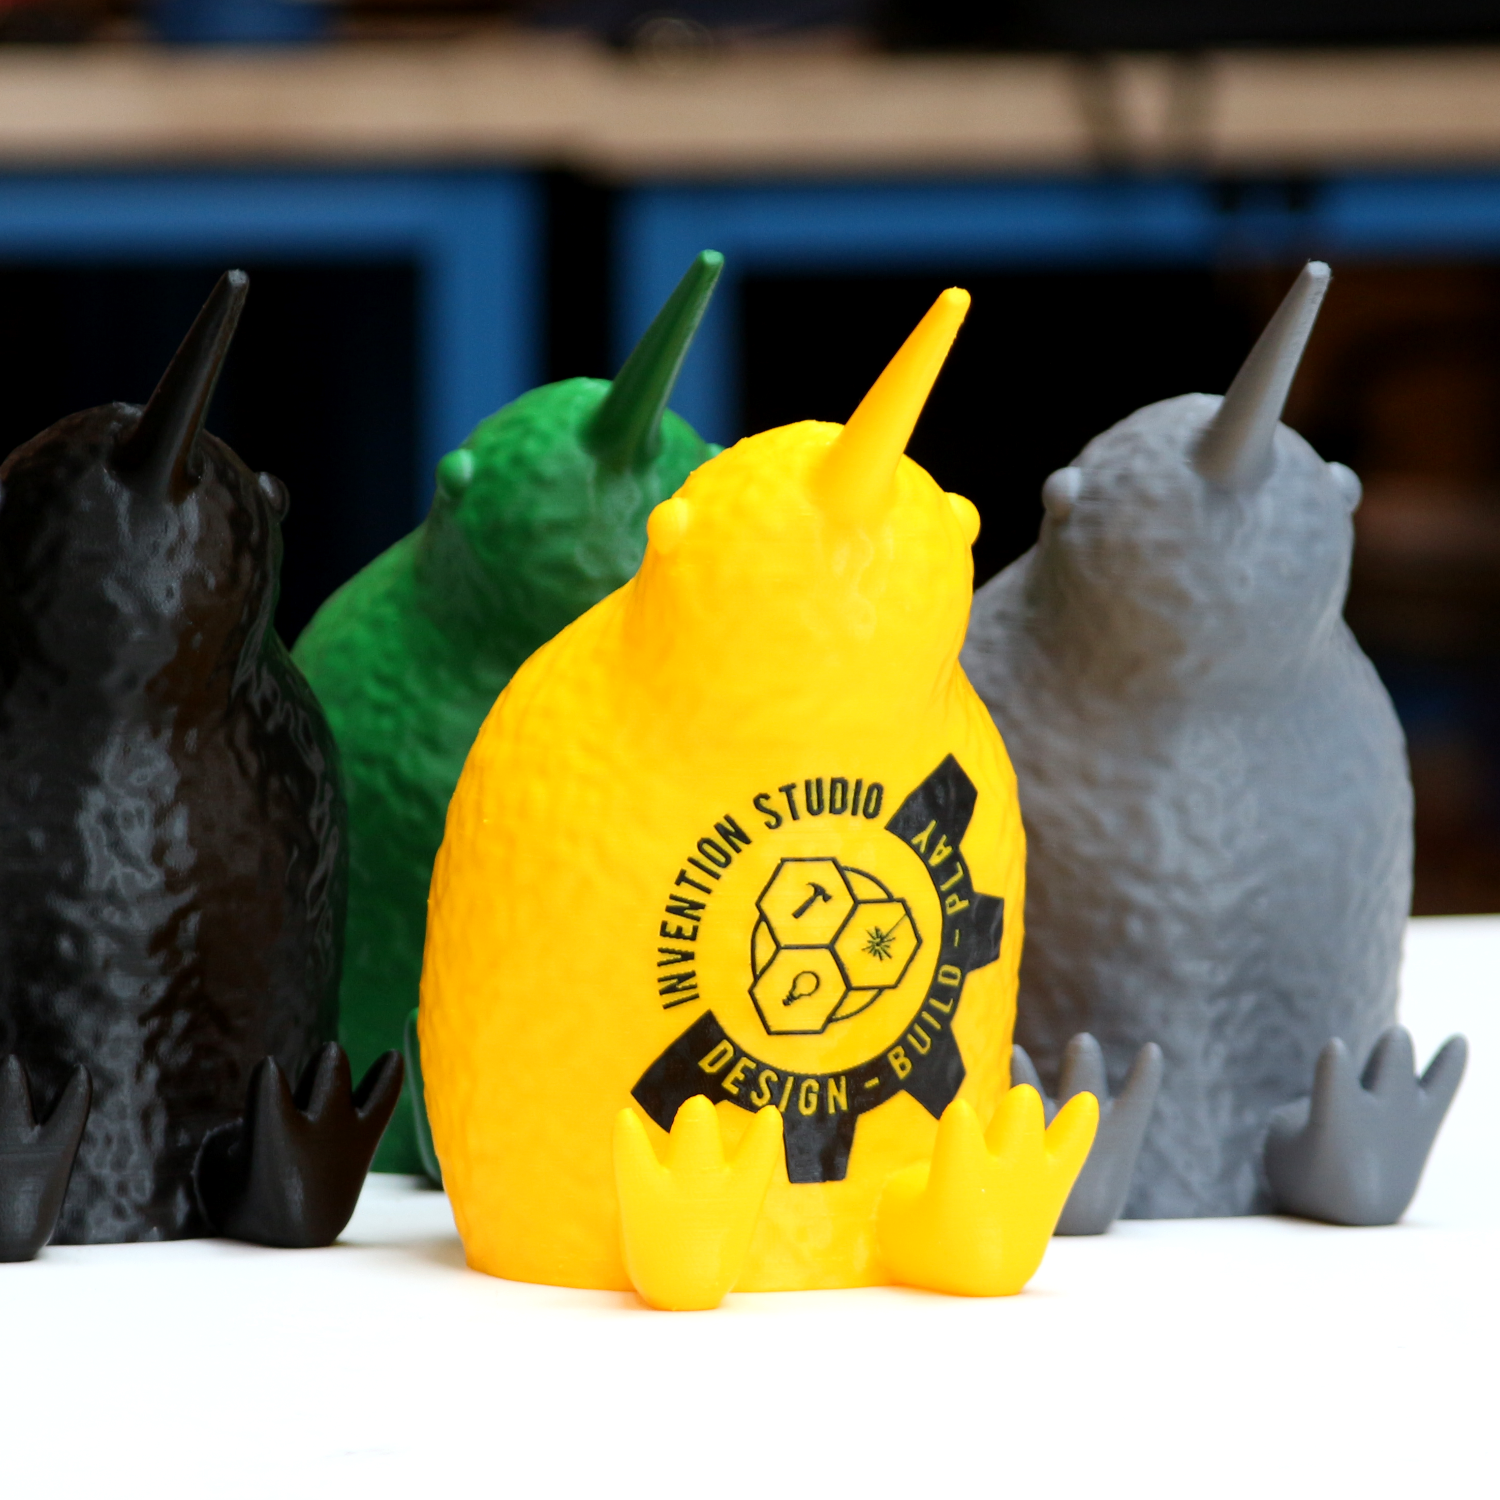 A photo of a 3D printed kiwi with the invention studio logo